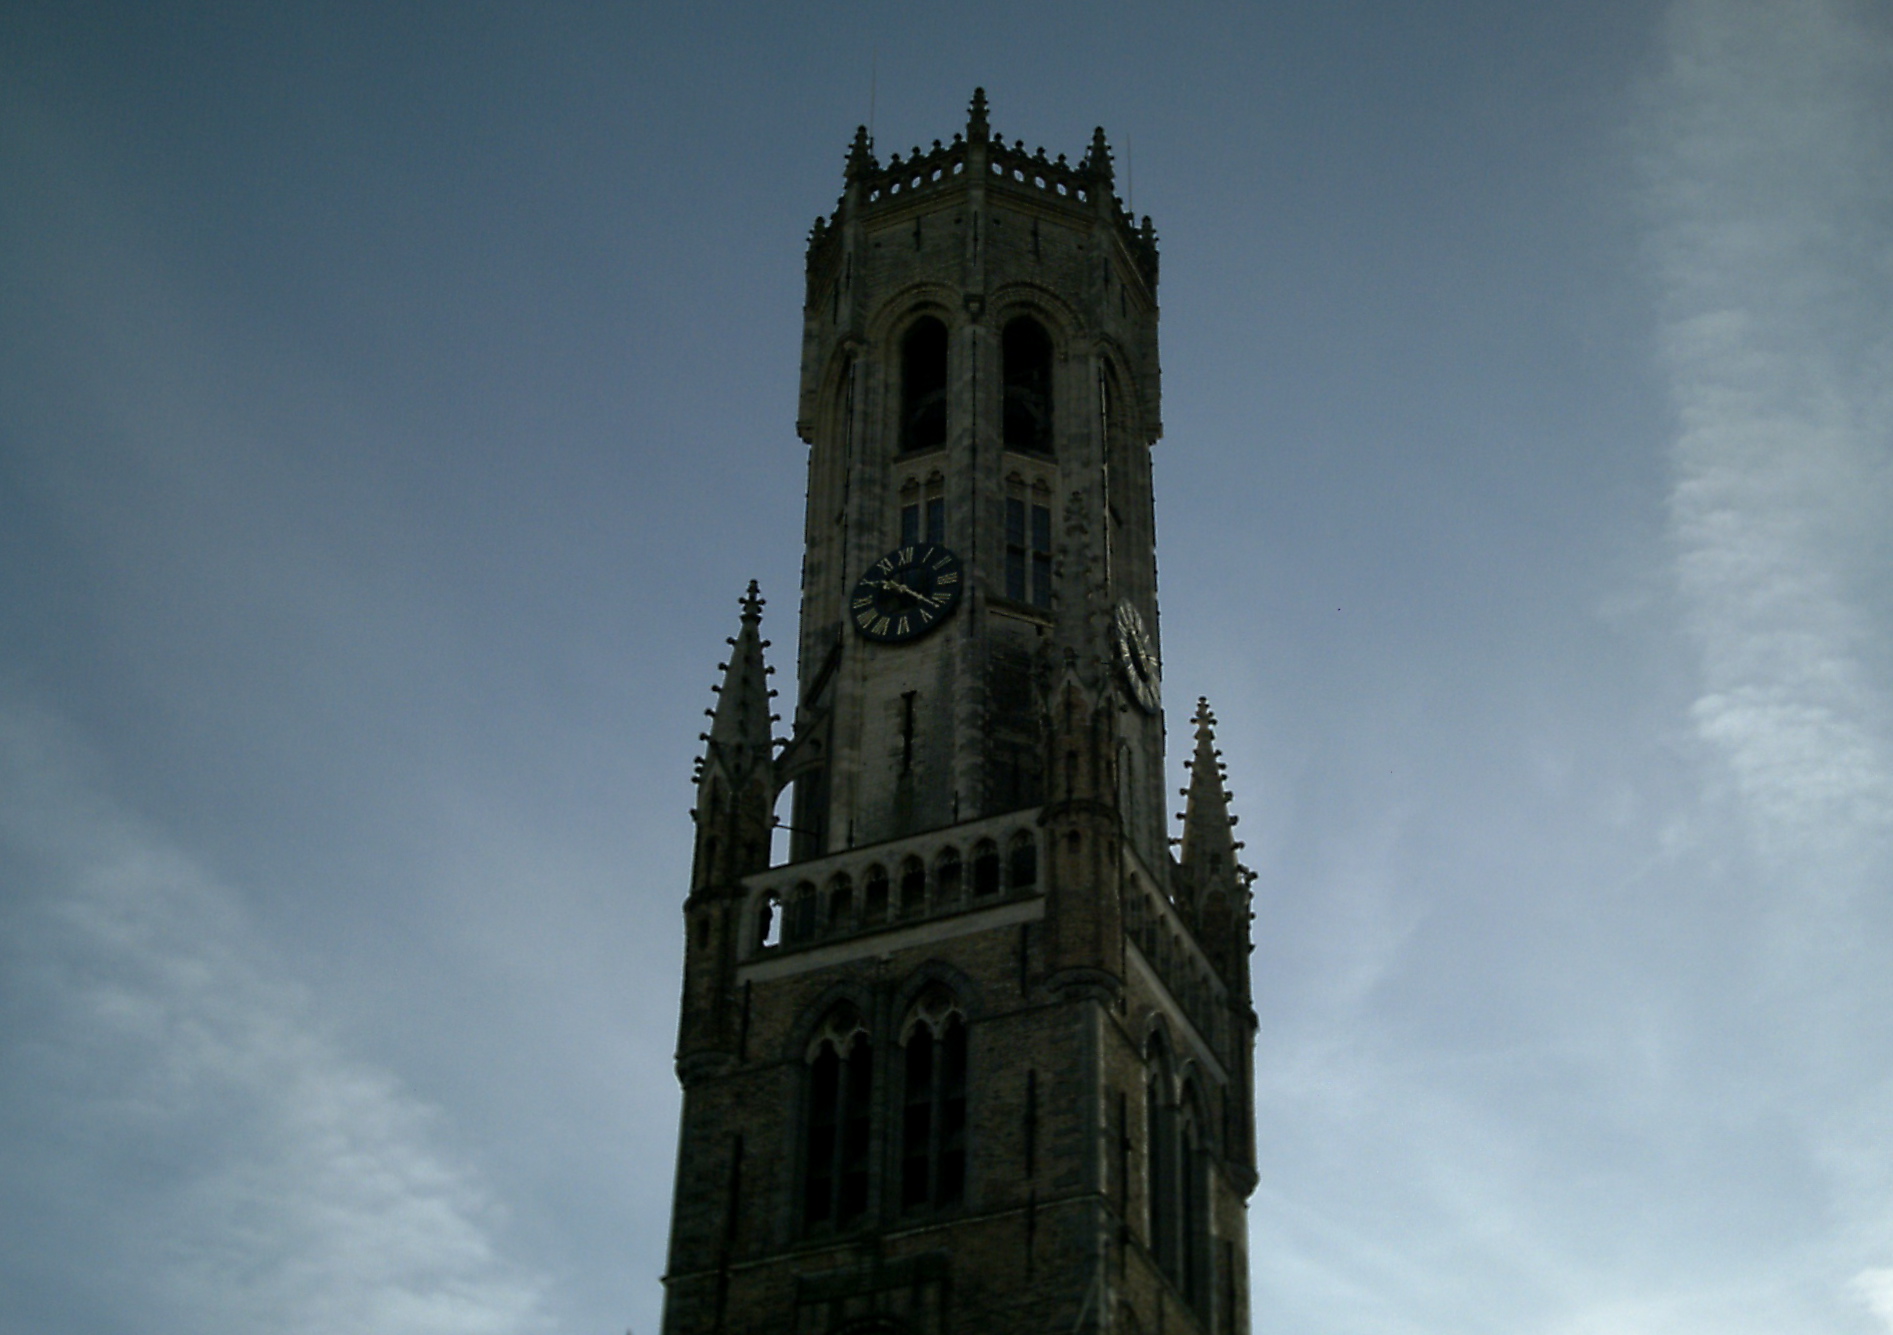 tall clock tower with a clock on top